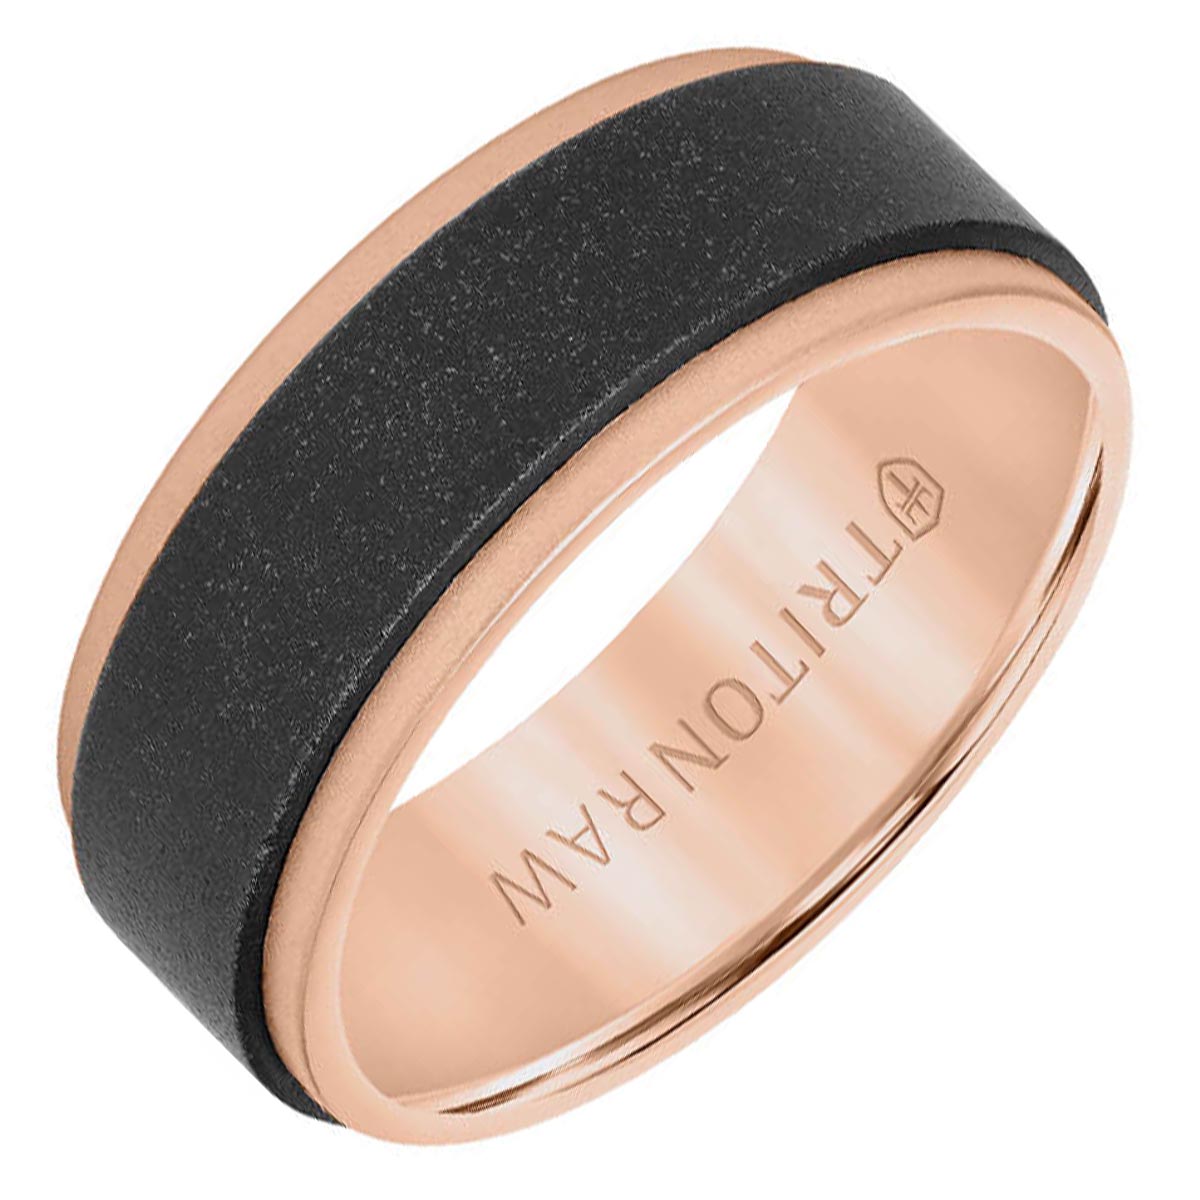 Triton Mens Wedding Band in 14kt Rose Gold and Tungsten (8mm)